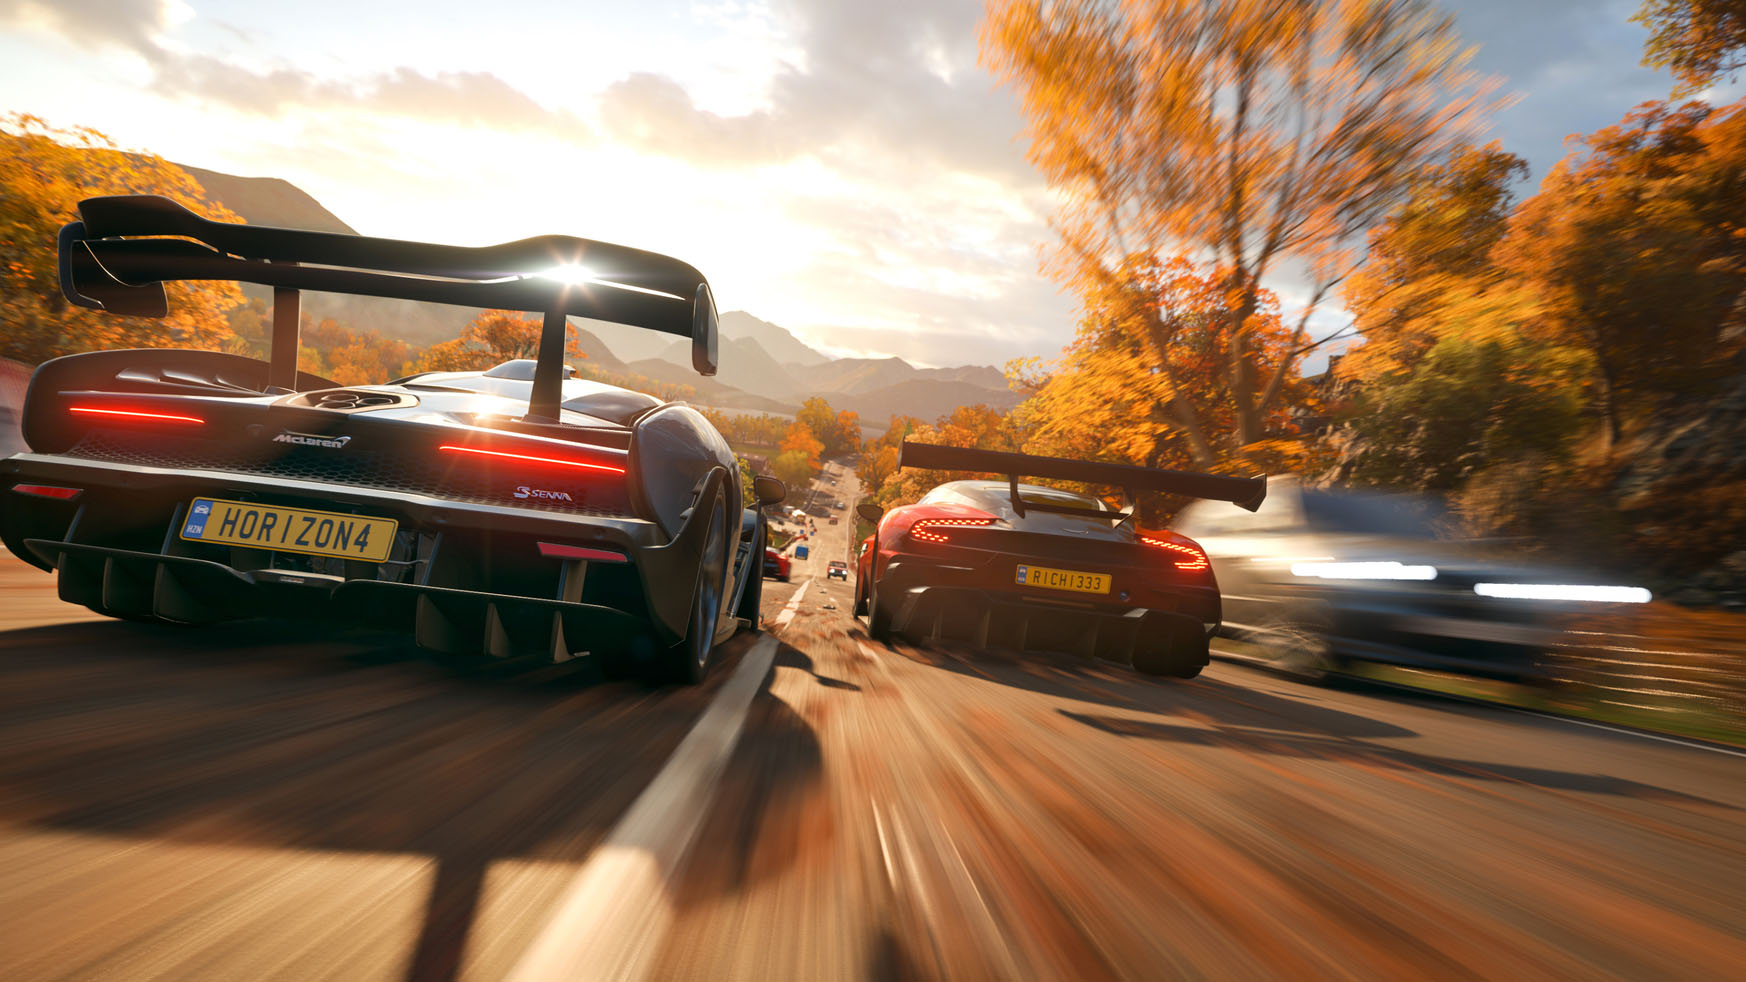 Cars racing in the Fall (surrounded by orange leaves) in Forza horizon 4